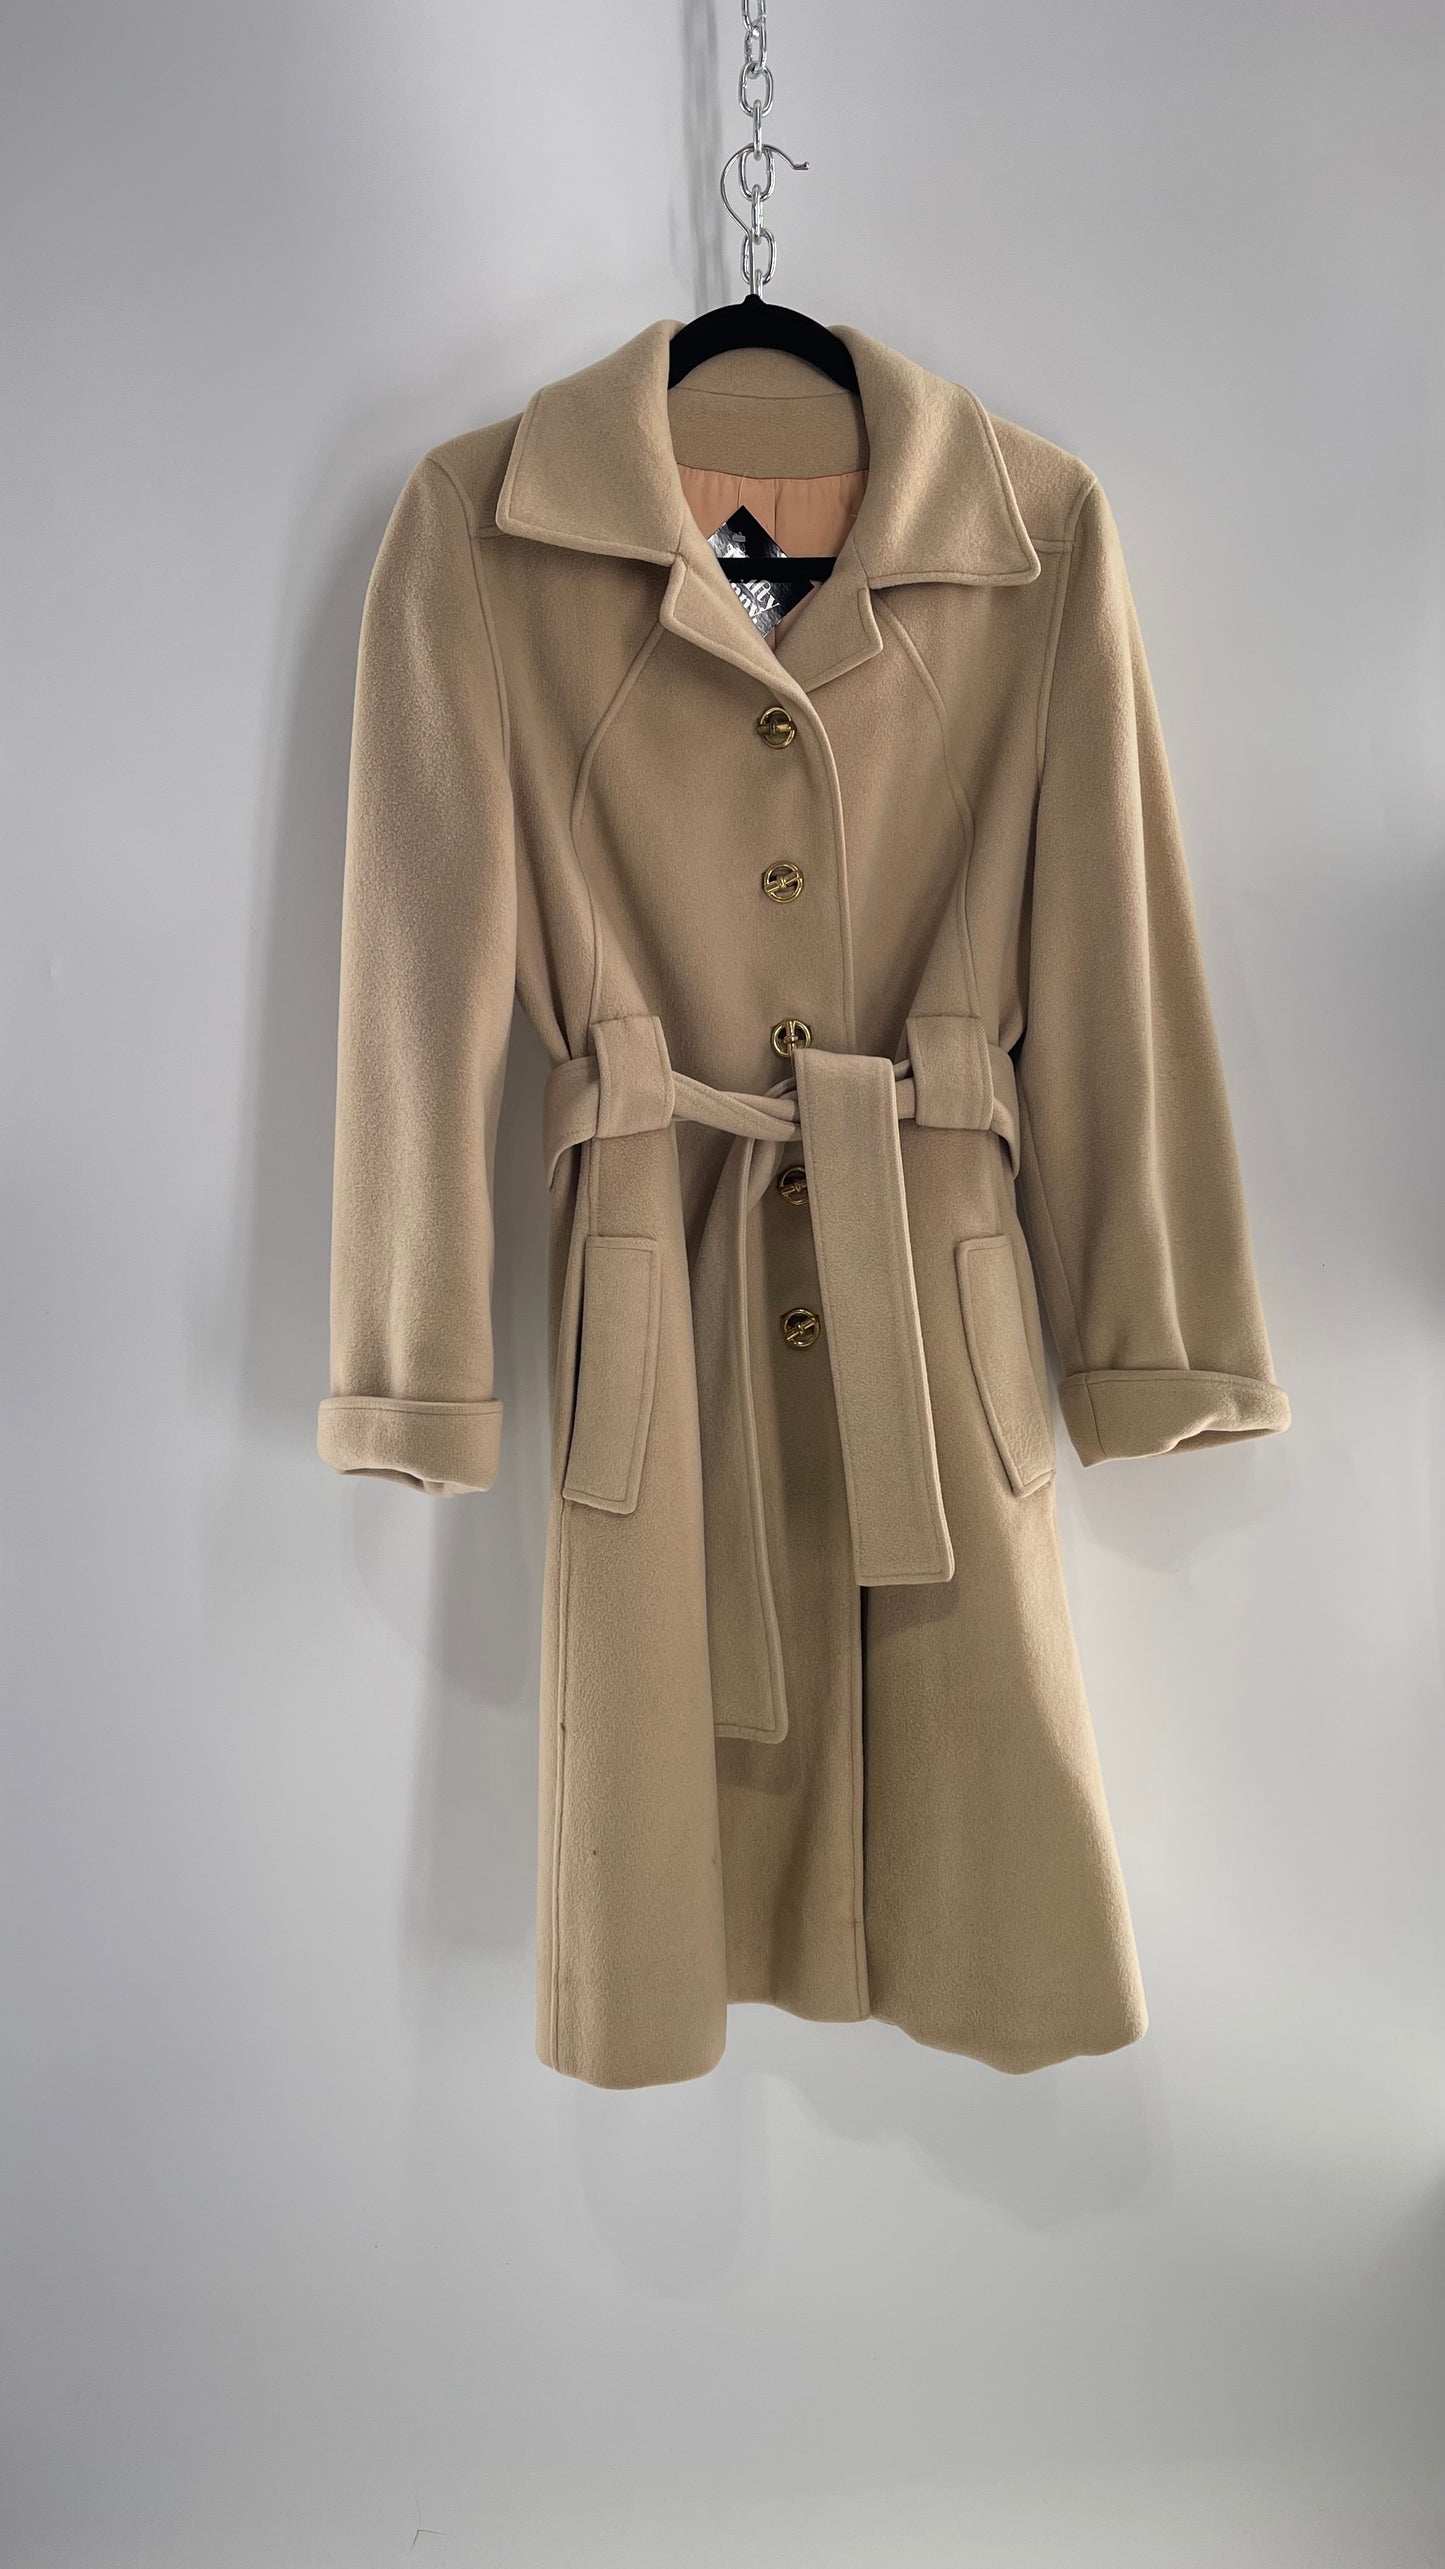 Vintage 100% Amicale Cashmere Beige Cream Coat with Apricot Satin Lining (C) (S/M)